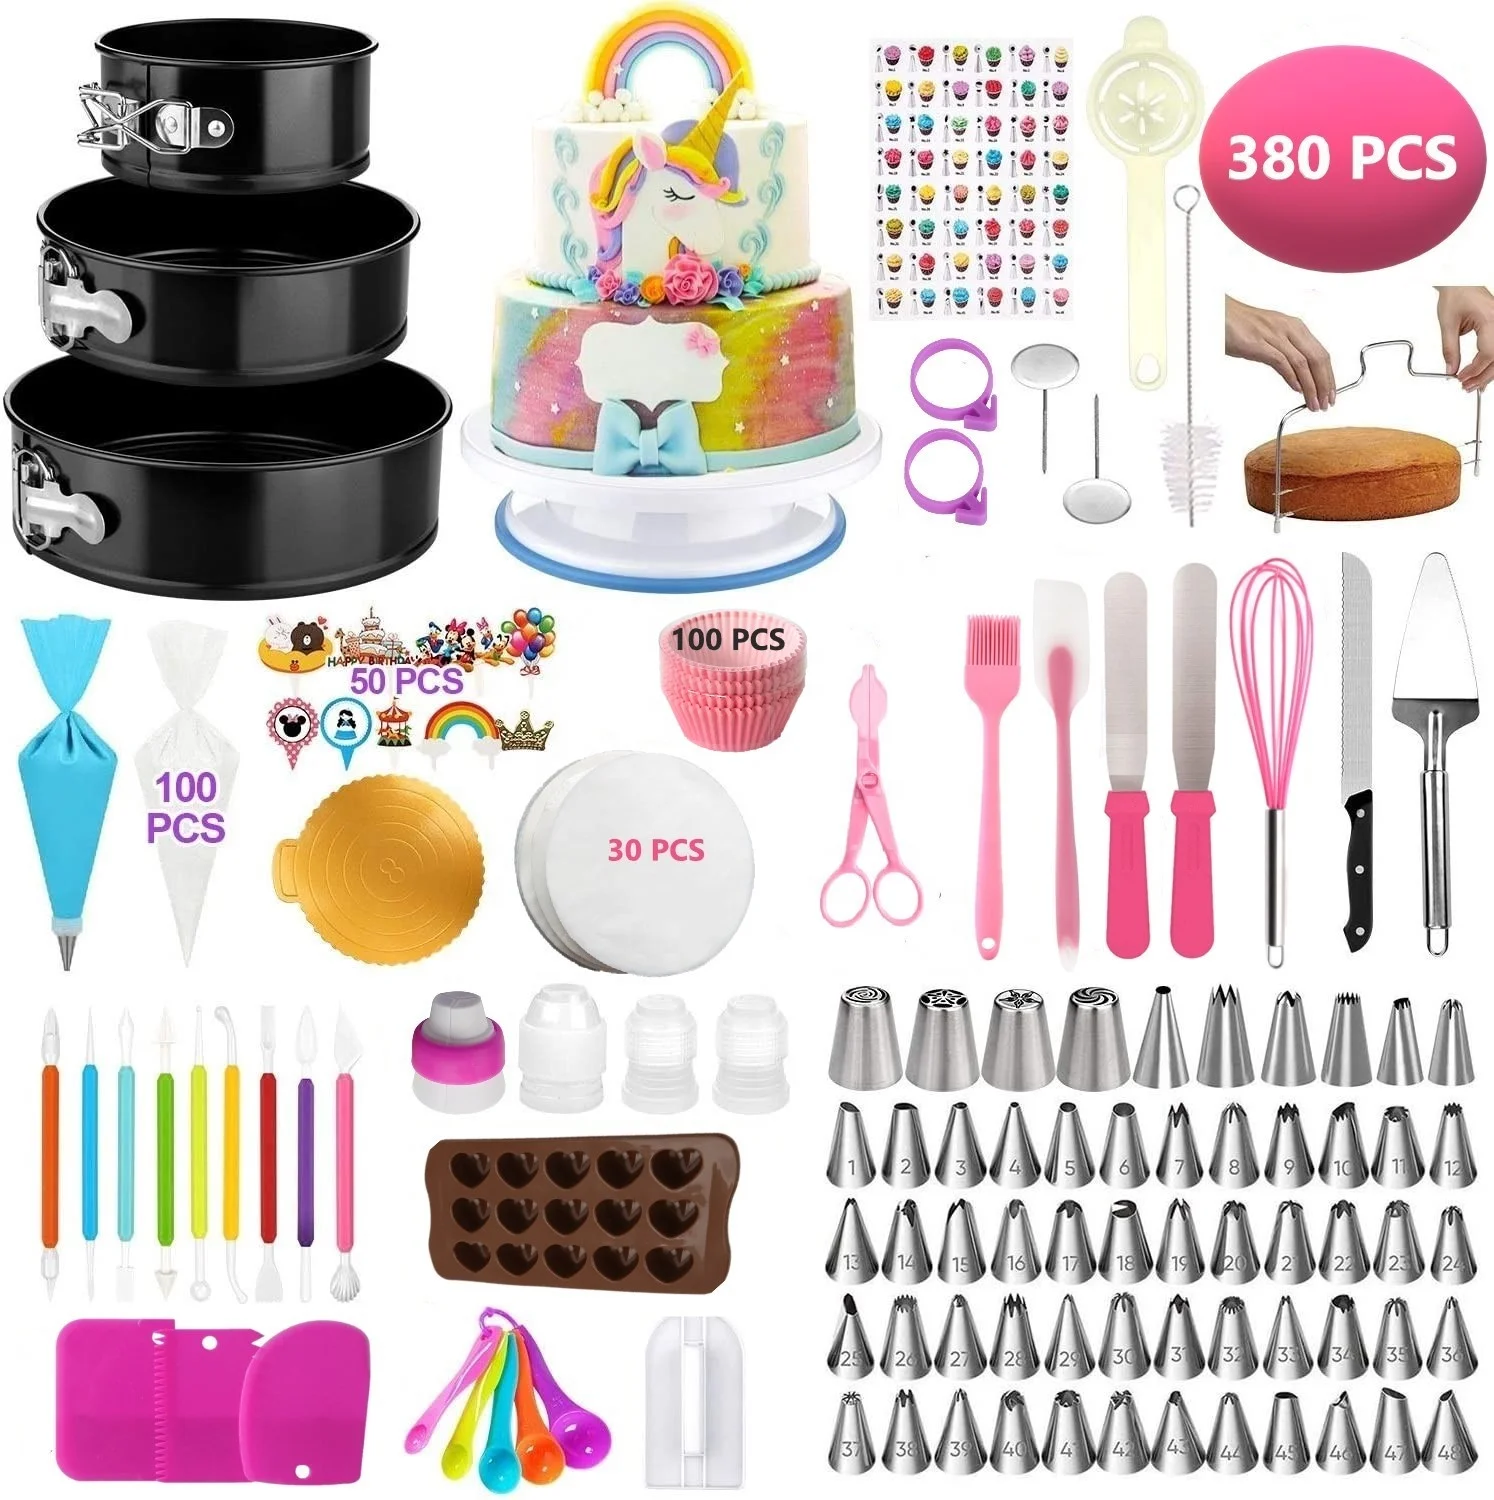 

Cake Decorating Supplies Kit 380pcs Baking Tools Set 3 Cake Pans 1 Turntable 48 Piping Tips 4 Russian Nozzles 8 Fondant Tools, Picture